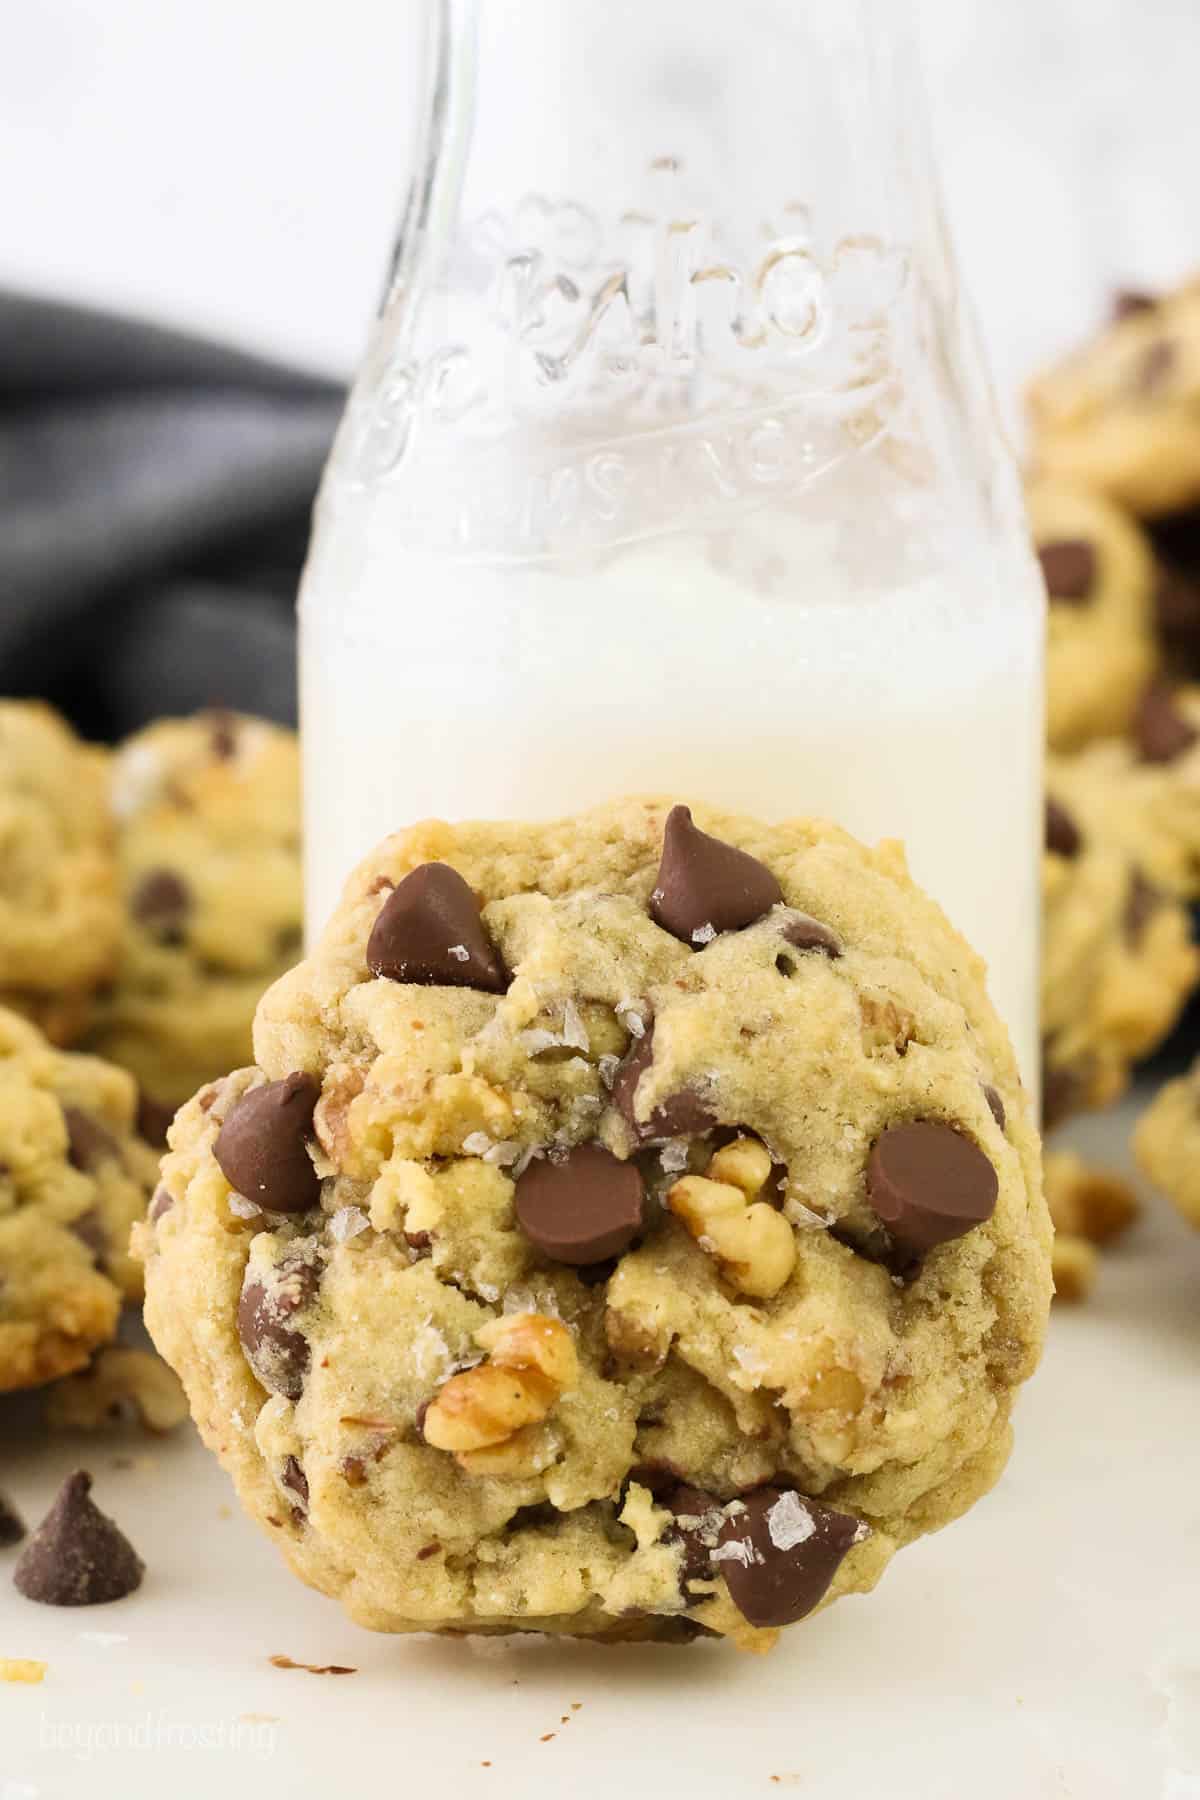 A chocolate chip walnut cookie against a glass of milk